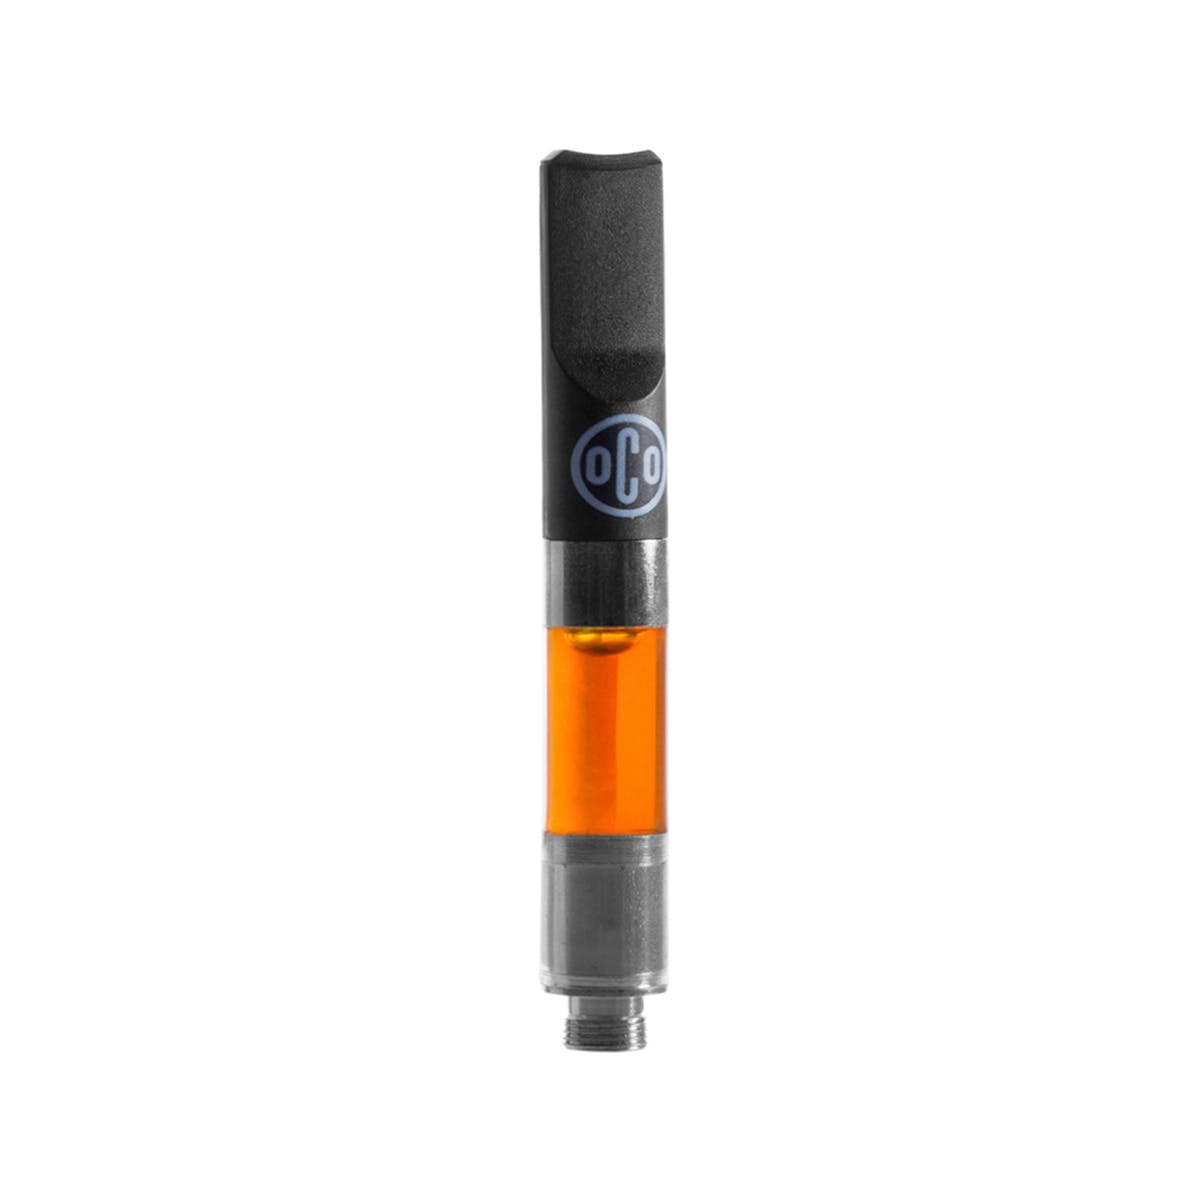 concentrate-oco-9-lb-hammer-cartridge